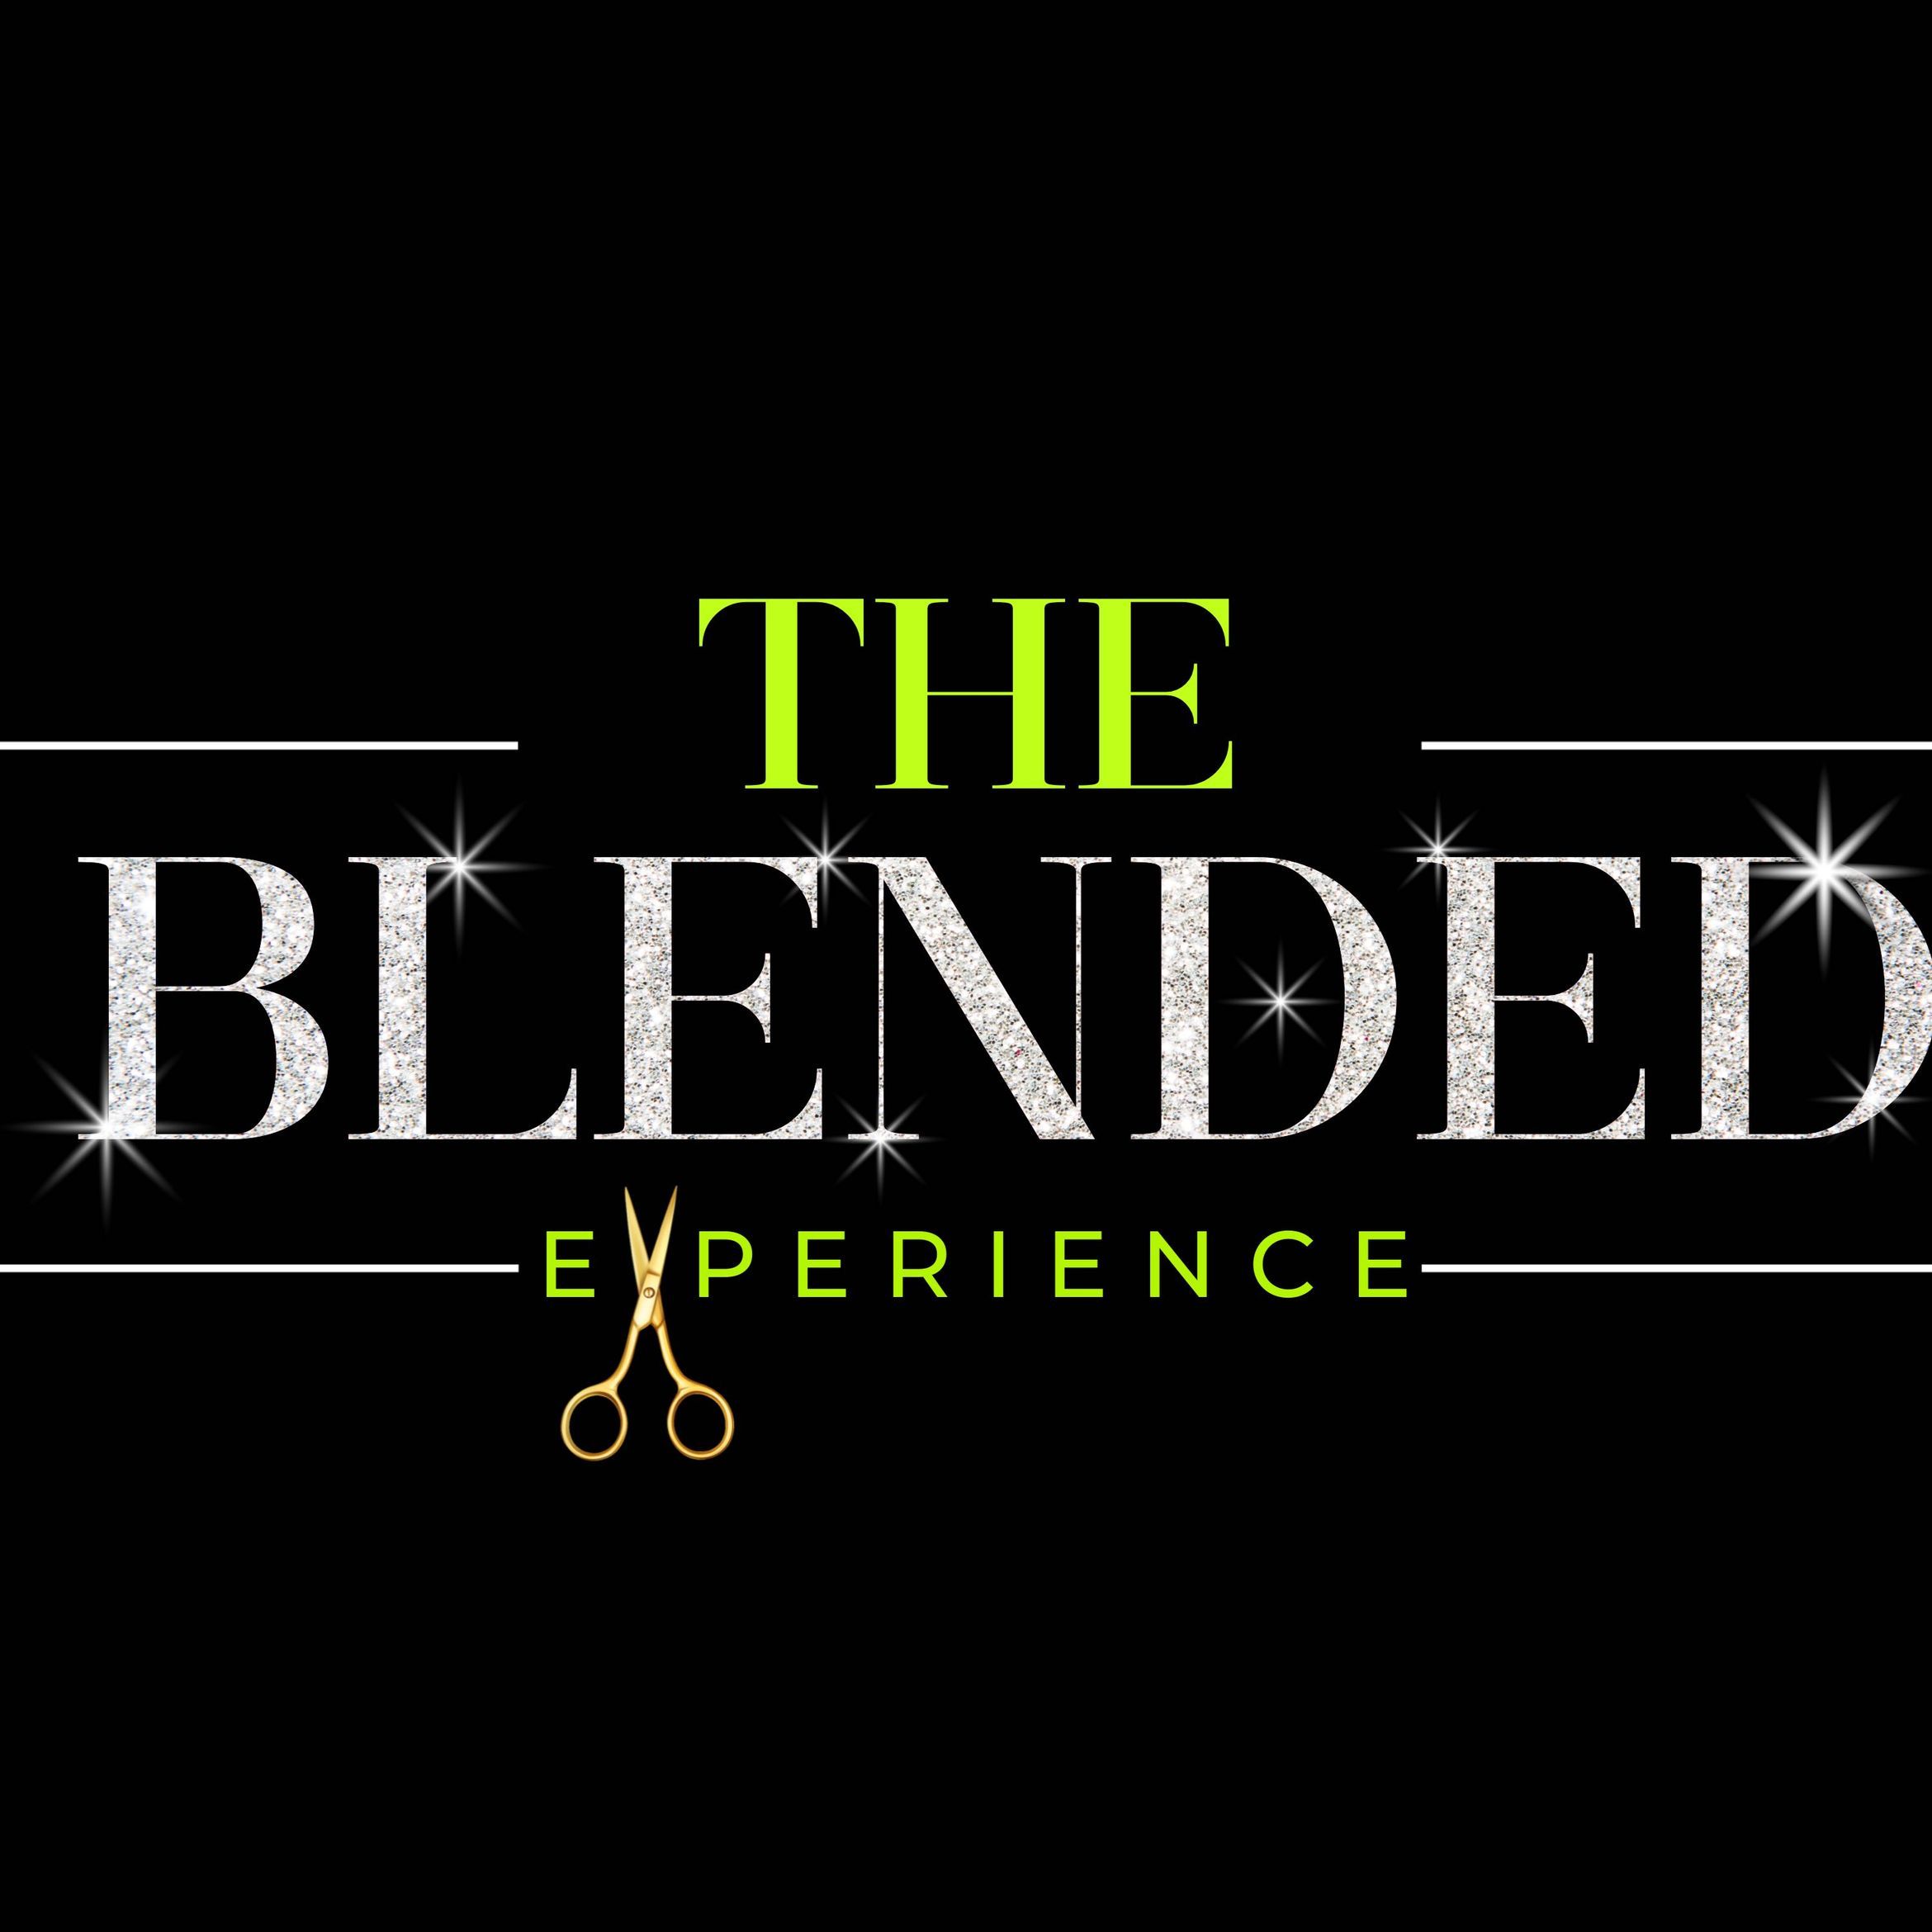 The Blended Experience By Trish, 680 Thornton way, 2nd floor, Suite 116, suite 116 (look for business name on directory), Lithia Springs, 30122